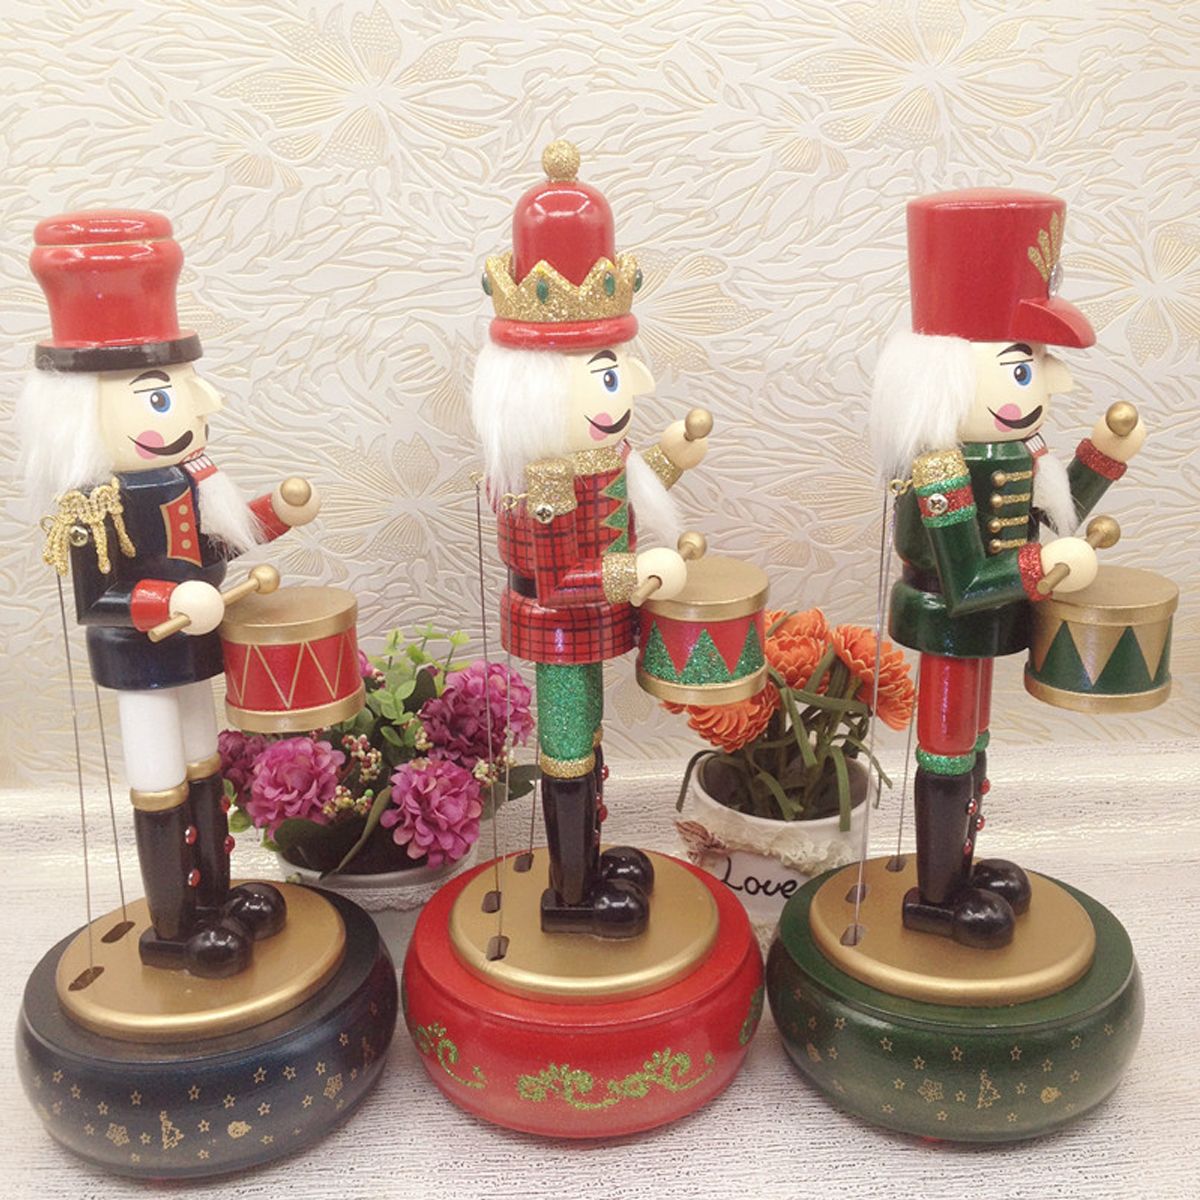 32CM-Wooden-Guard-Nutcracker-Soldier-Toy-Music-Box-Christmas-Decorations-Xmas-Gift-1605612